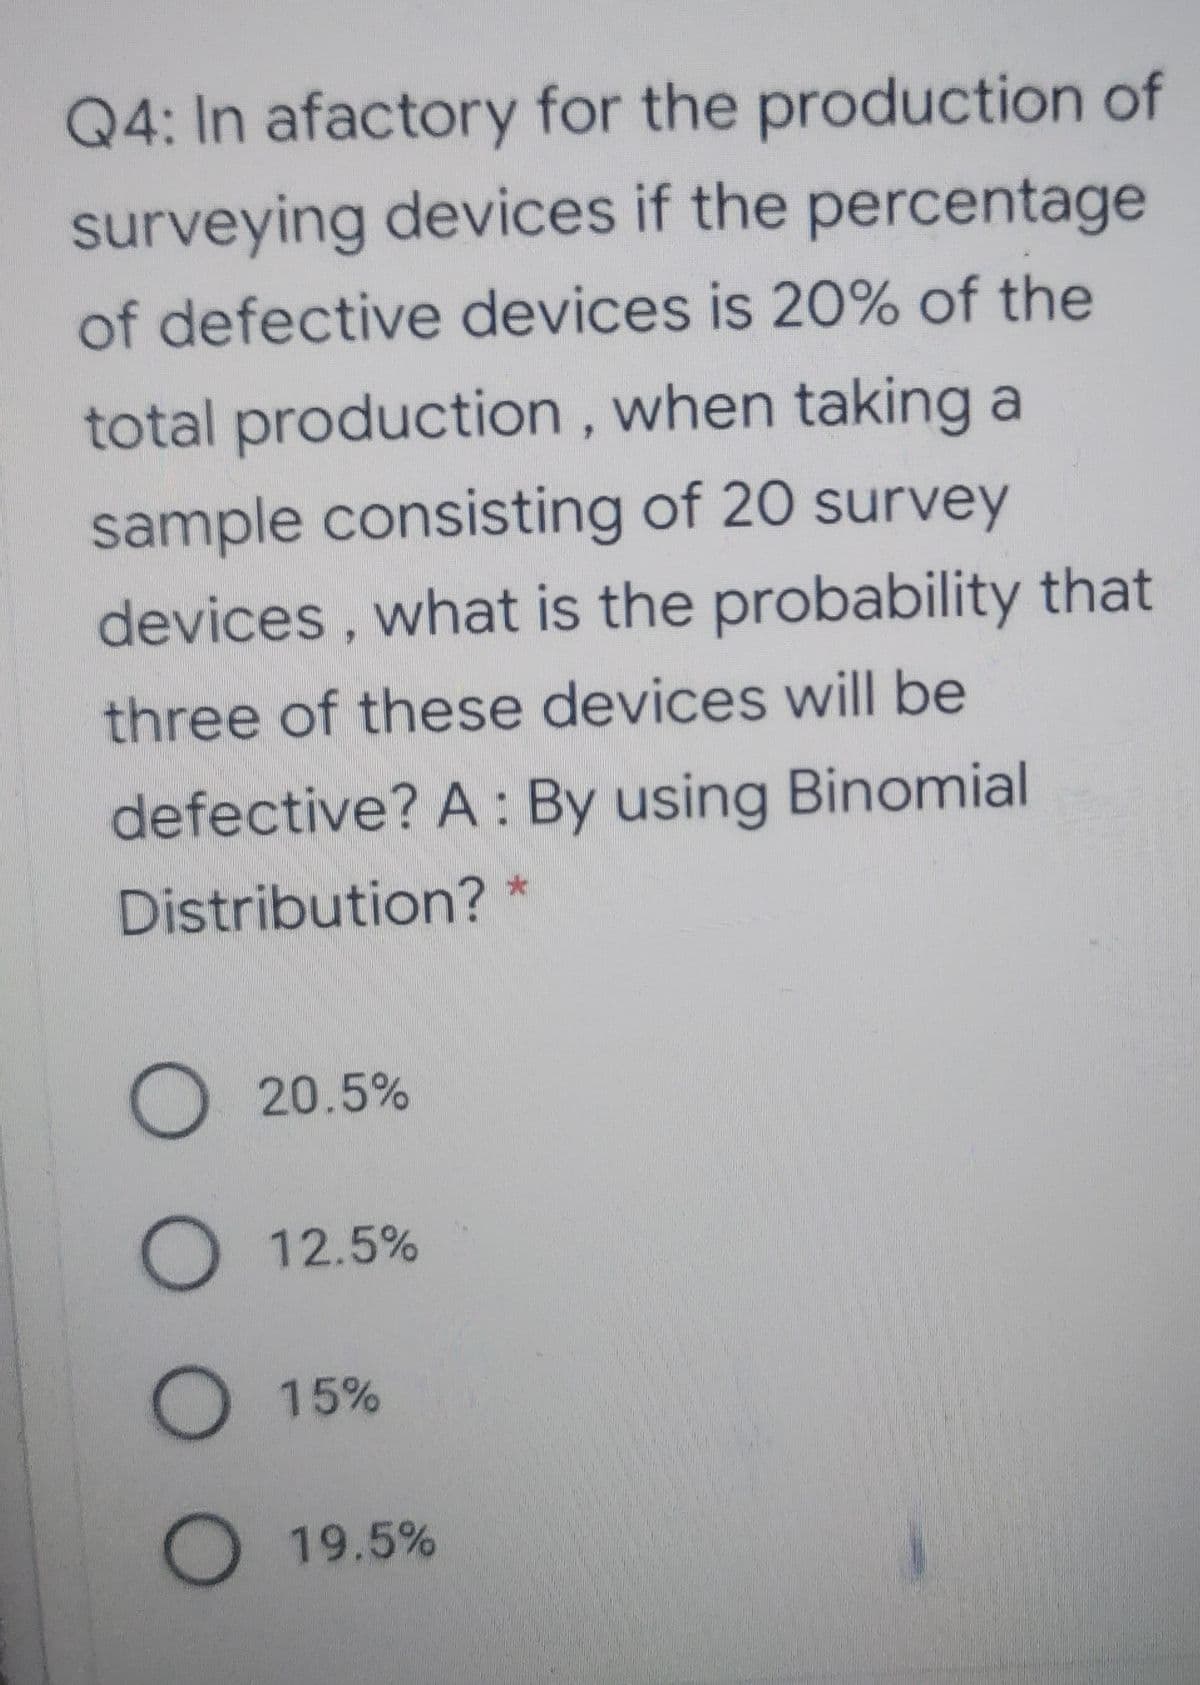 Q4: In afactory for the production of
surveying devices if the percentage
of defective devices is 20% of the
total production, when taking a
sample consisting of 20 survey
devices, what is the probability that
three of these devices will be
defective? A : By using Binomial
Distribution? *
20.5%
O 12.5%
O 15%
O 19.5%
000 O
